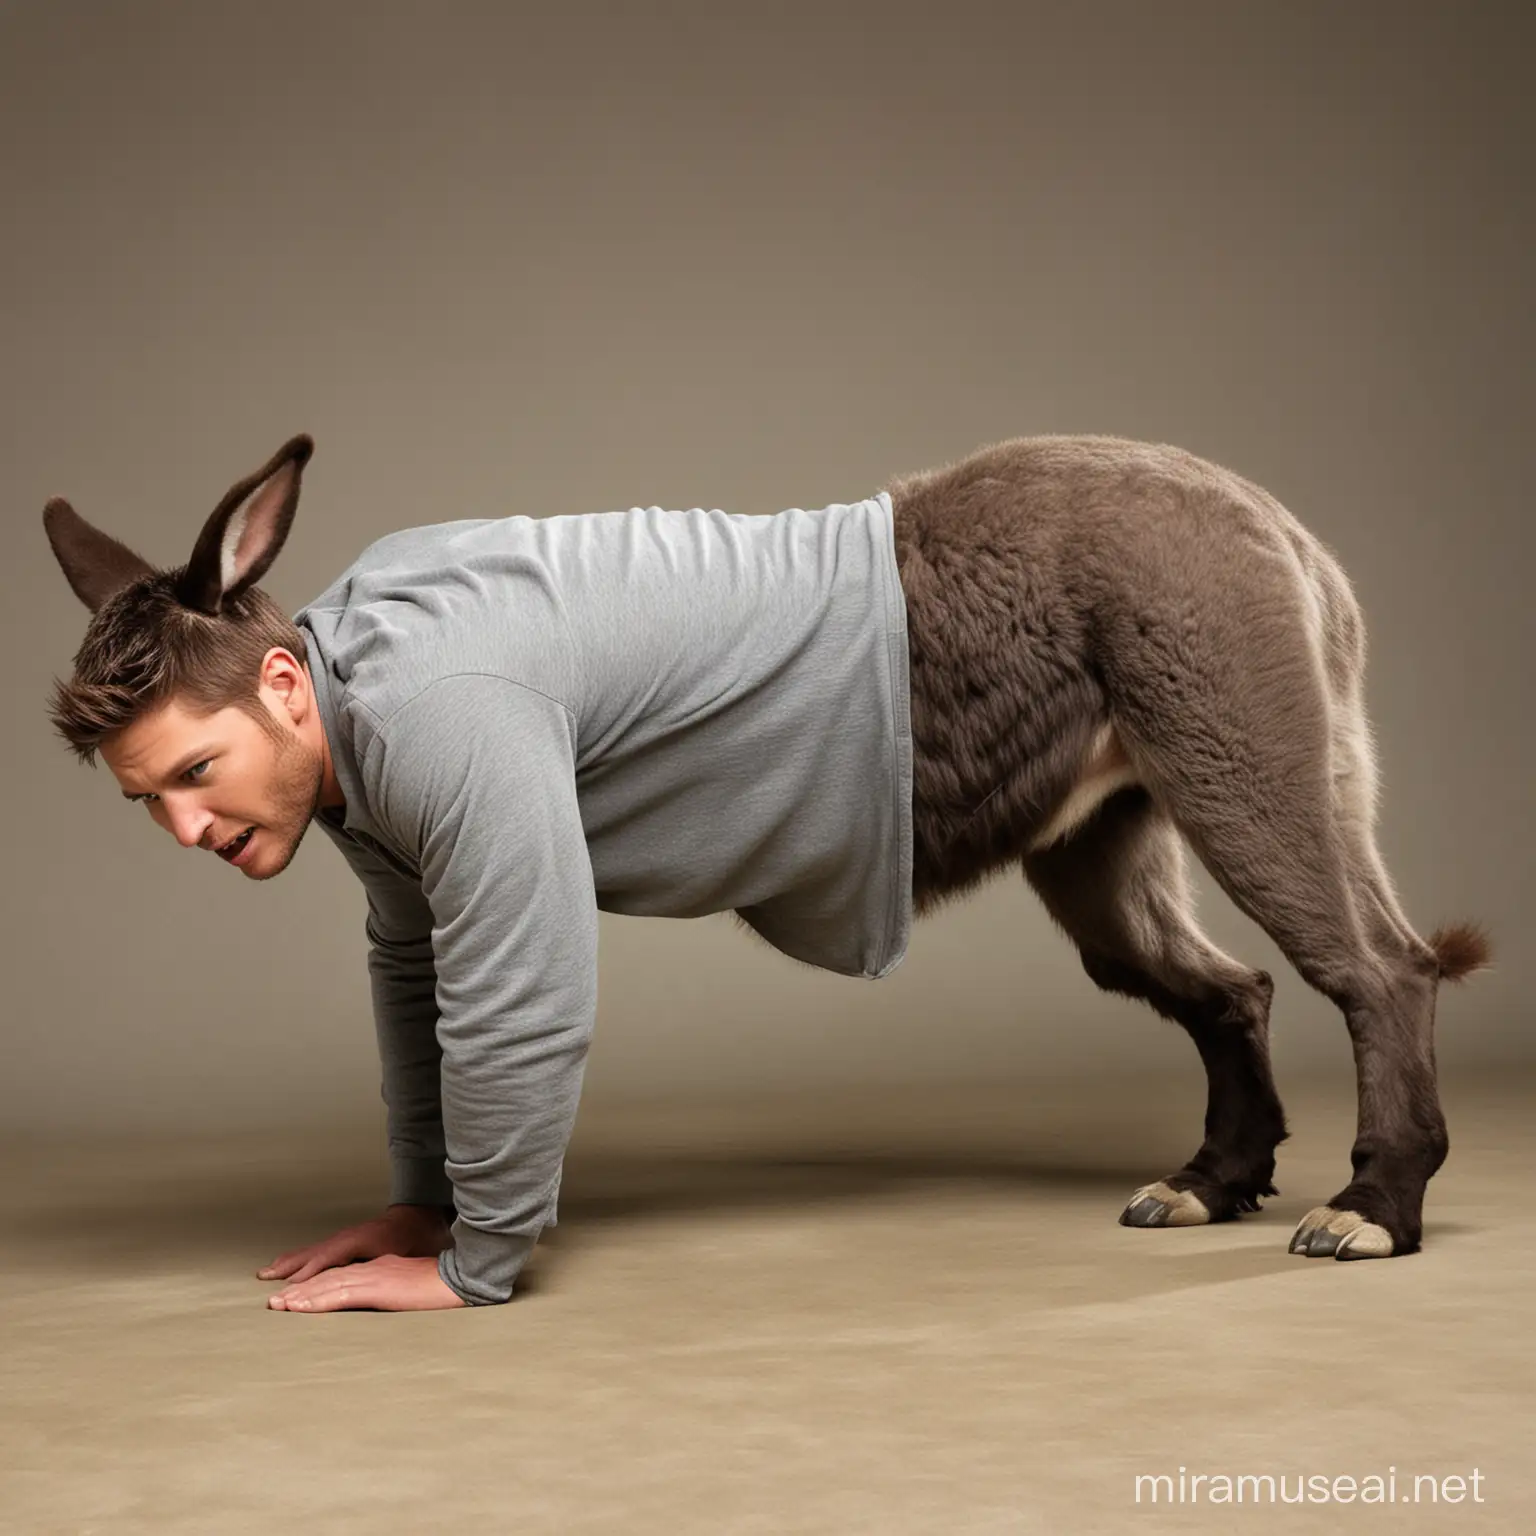 Actor Jensen Ackles Transforms into a Braying Donkey